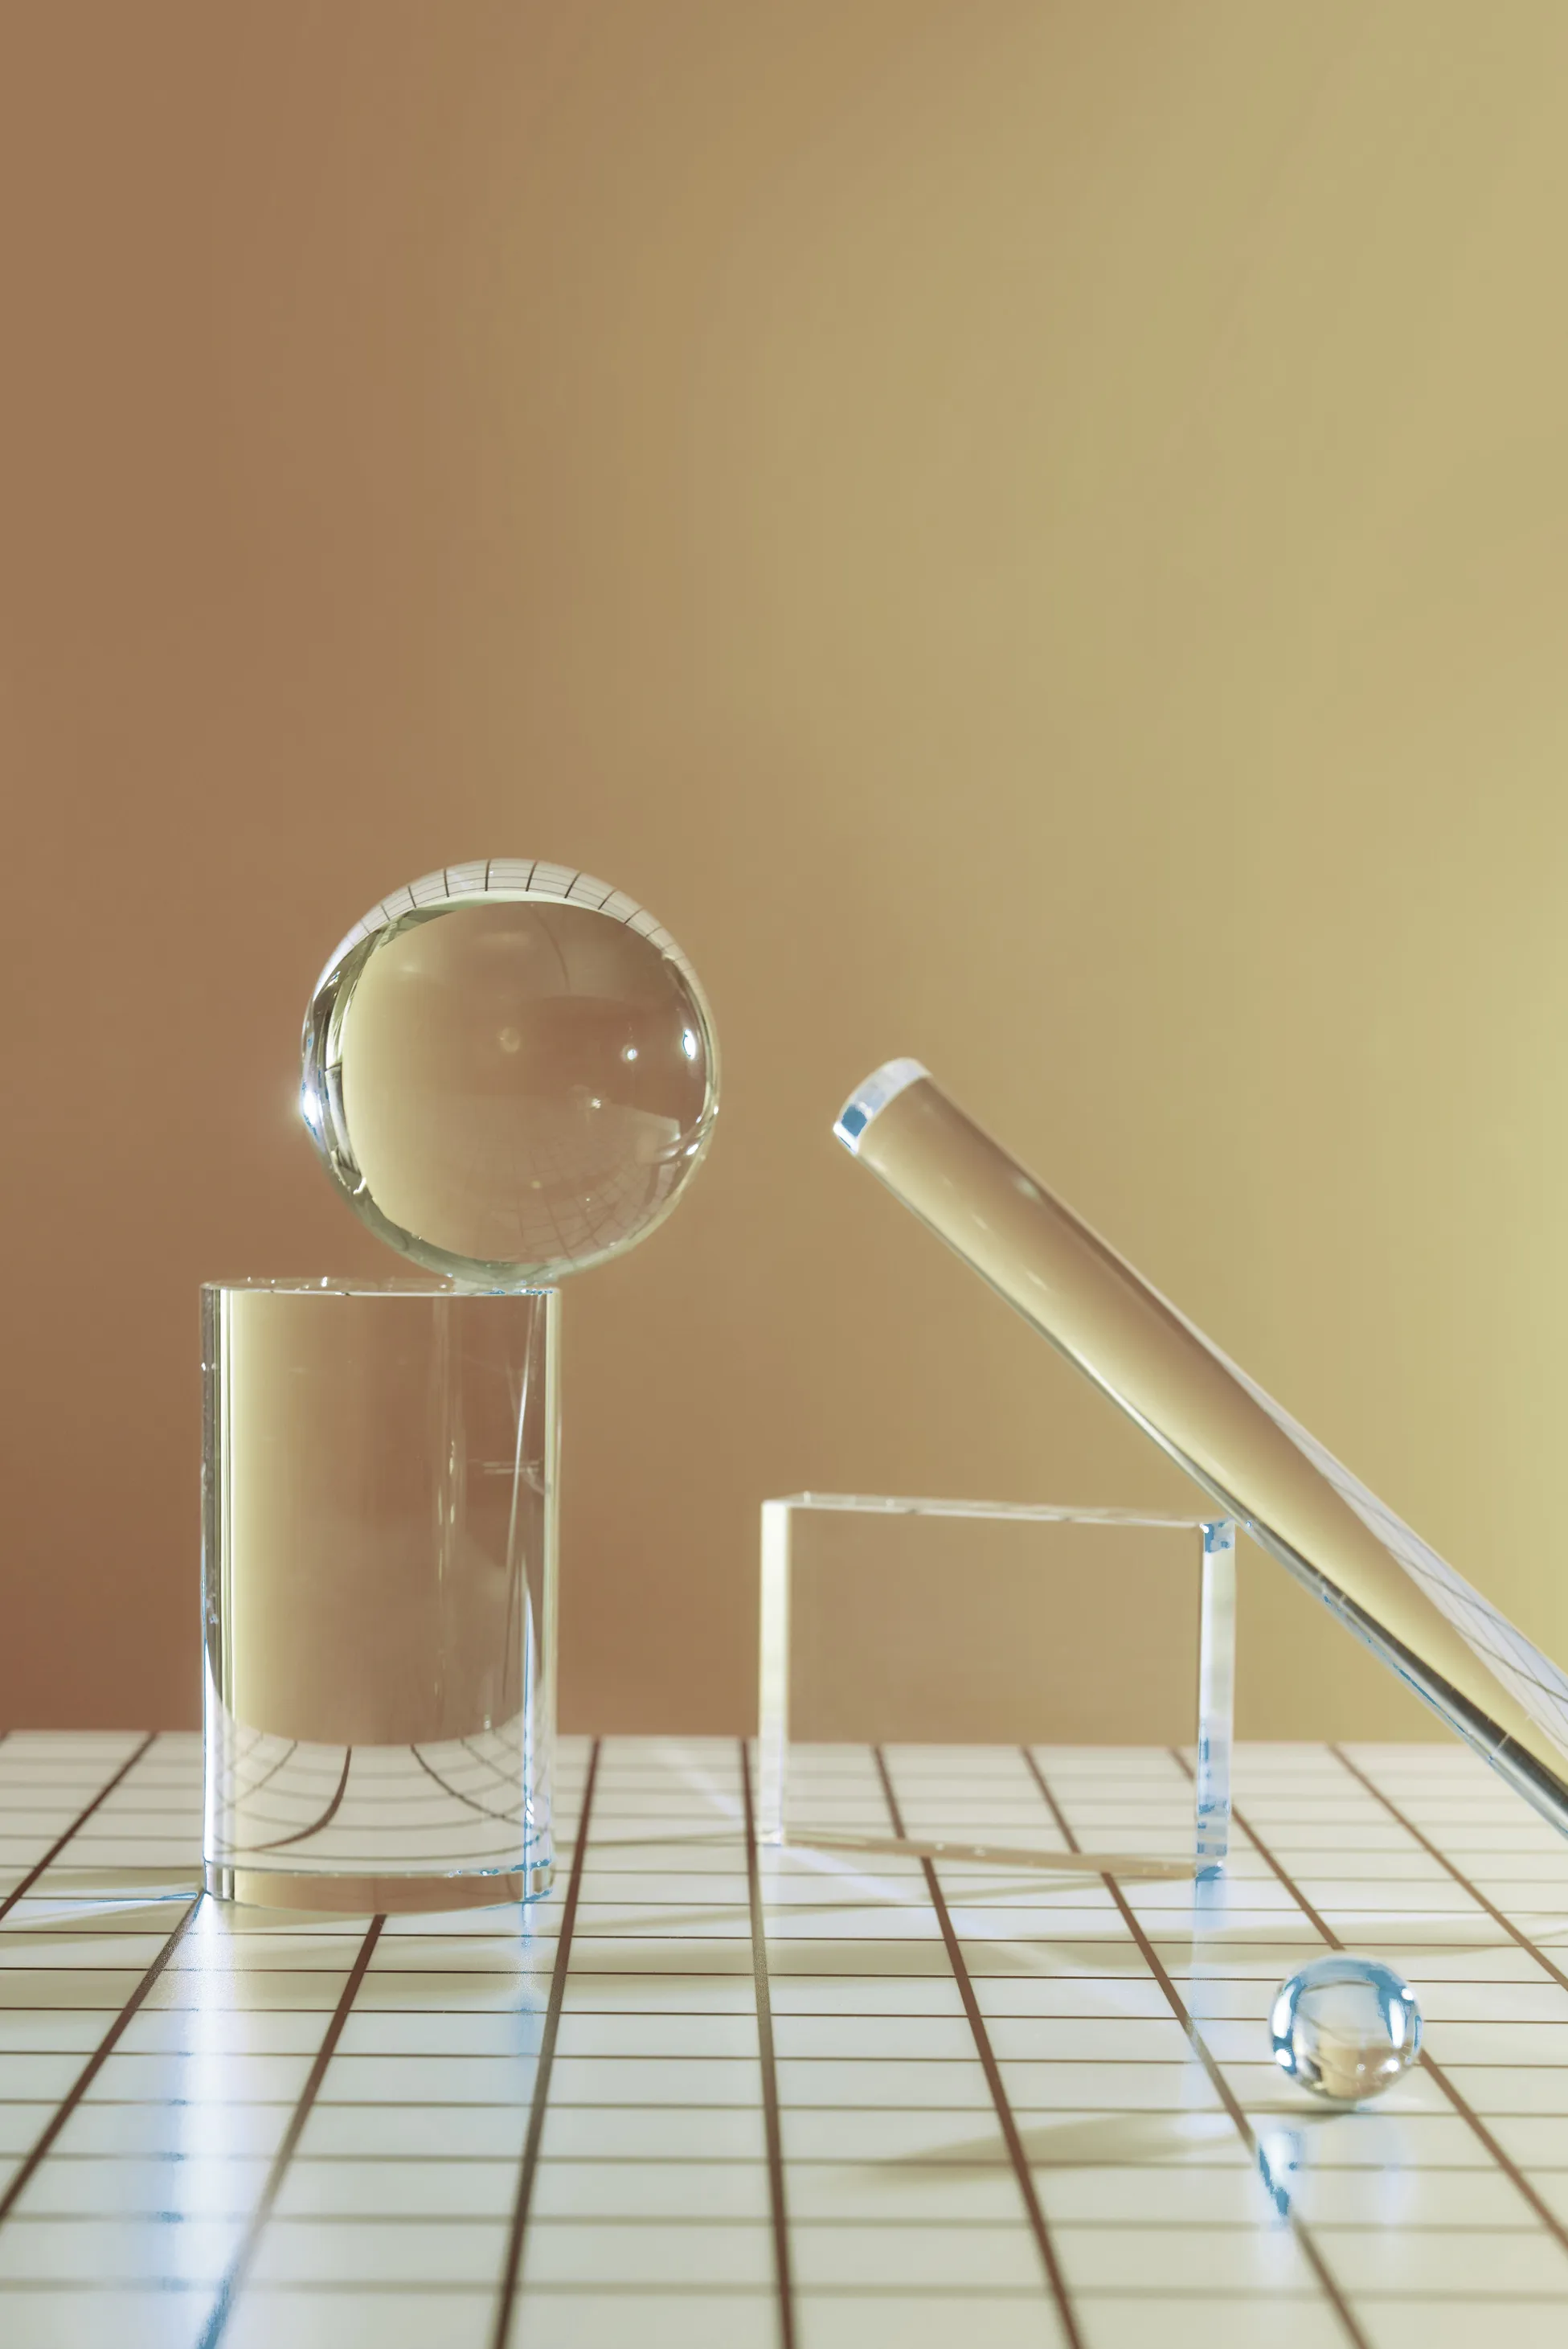 A composition of clear glass objects, including a sphere, a cylinder, and a cube on a white grid-patterned surface with a warm beige backdrop.